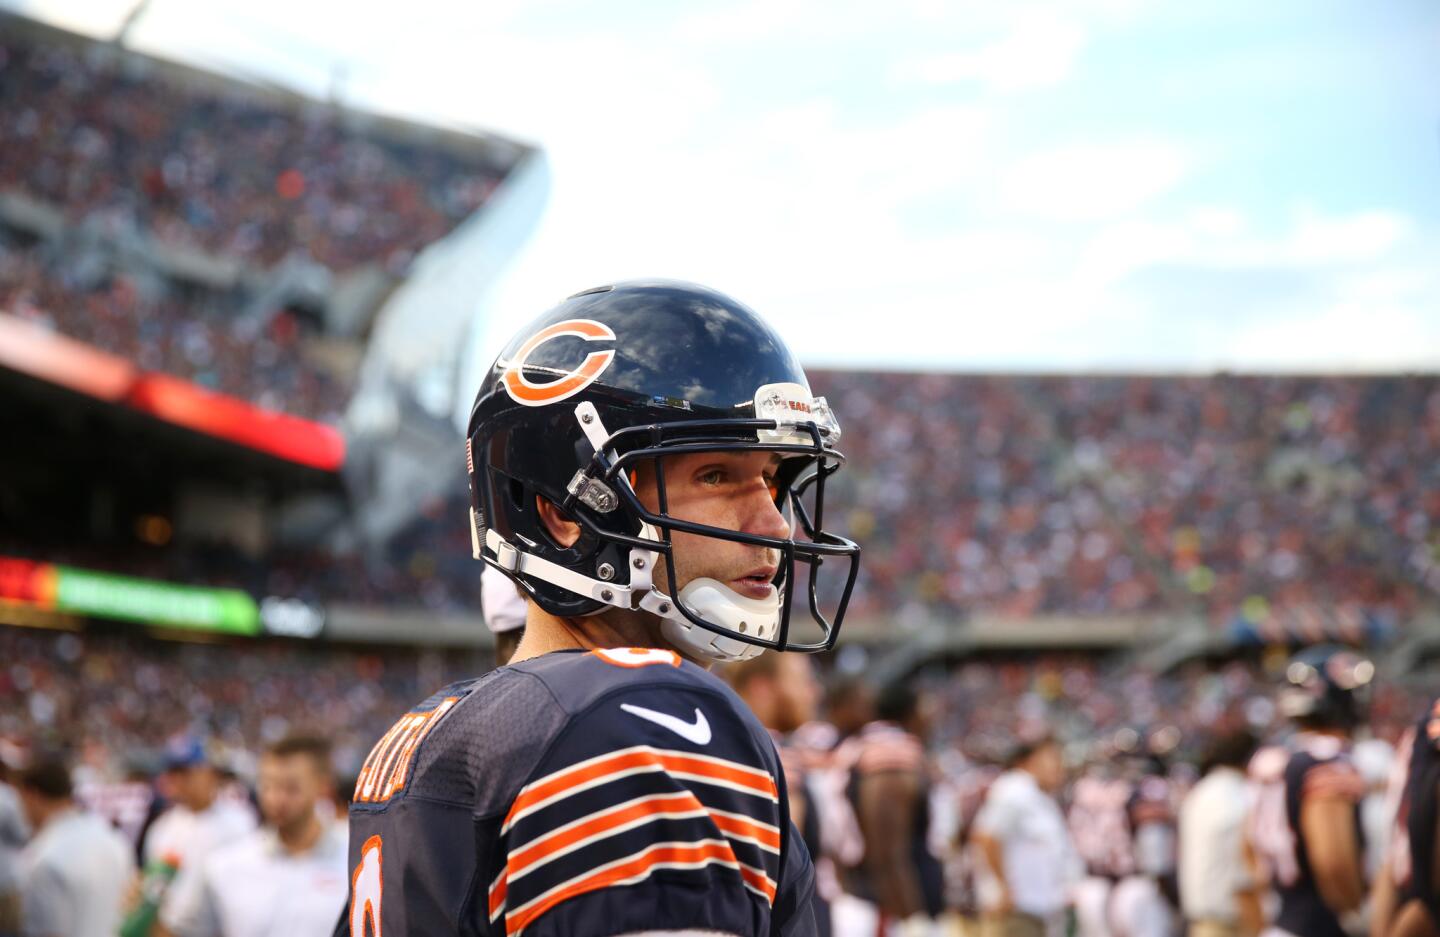 Jay Cutler pauses before heading into the game for the first offensive set in the first quarter of a preseason game against the Miami Dolphins.